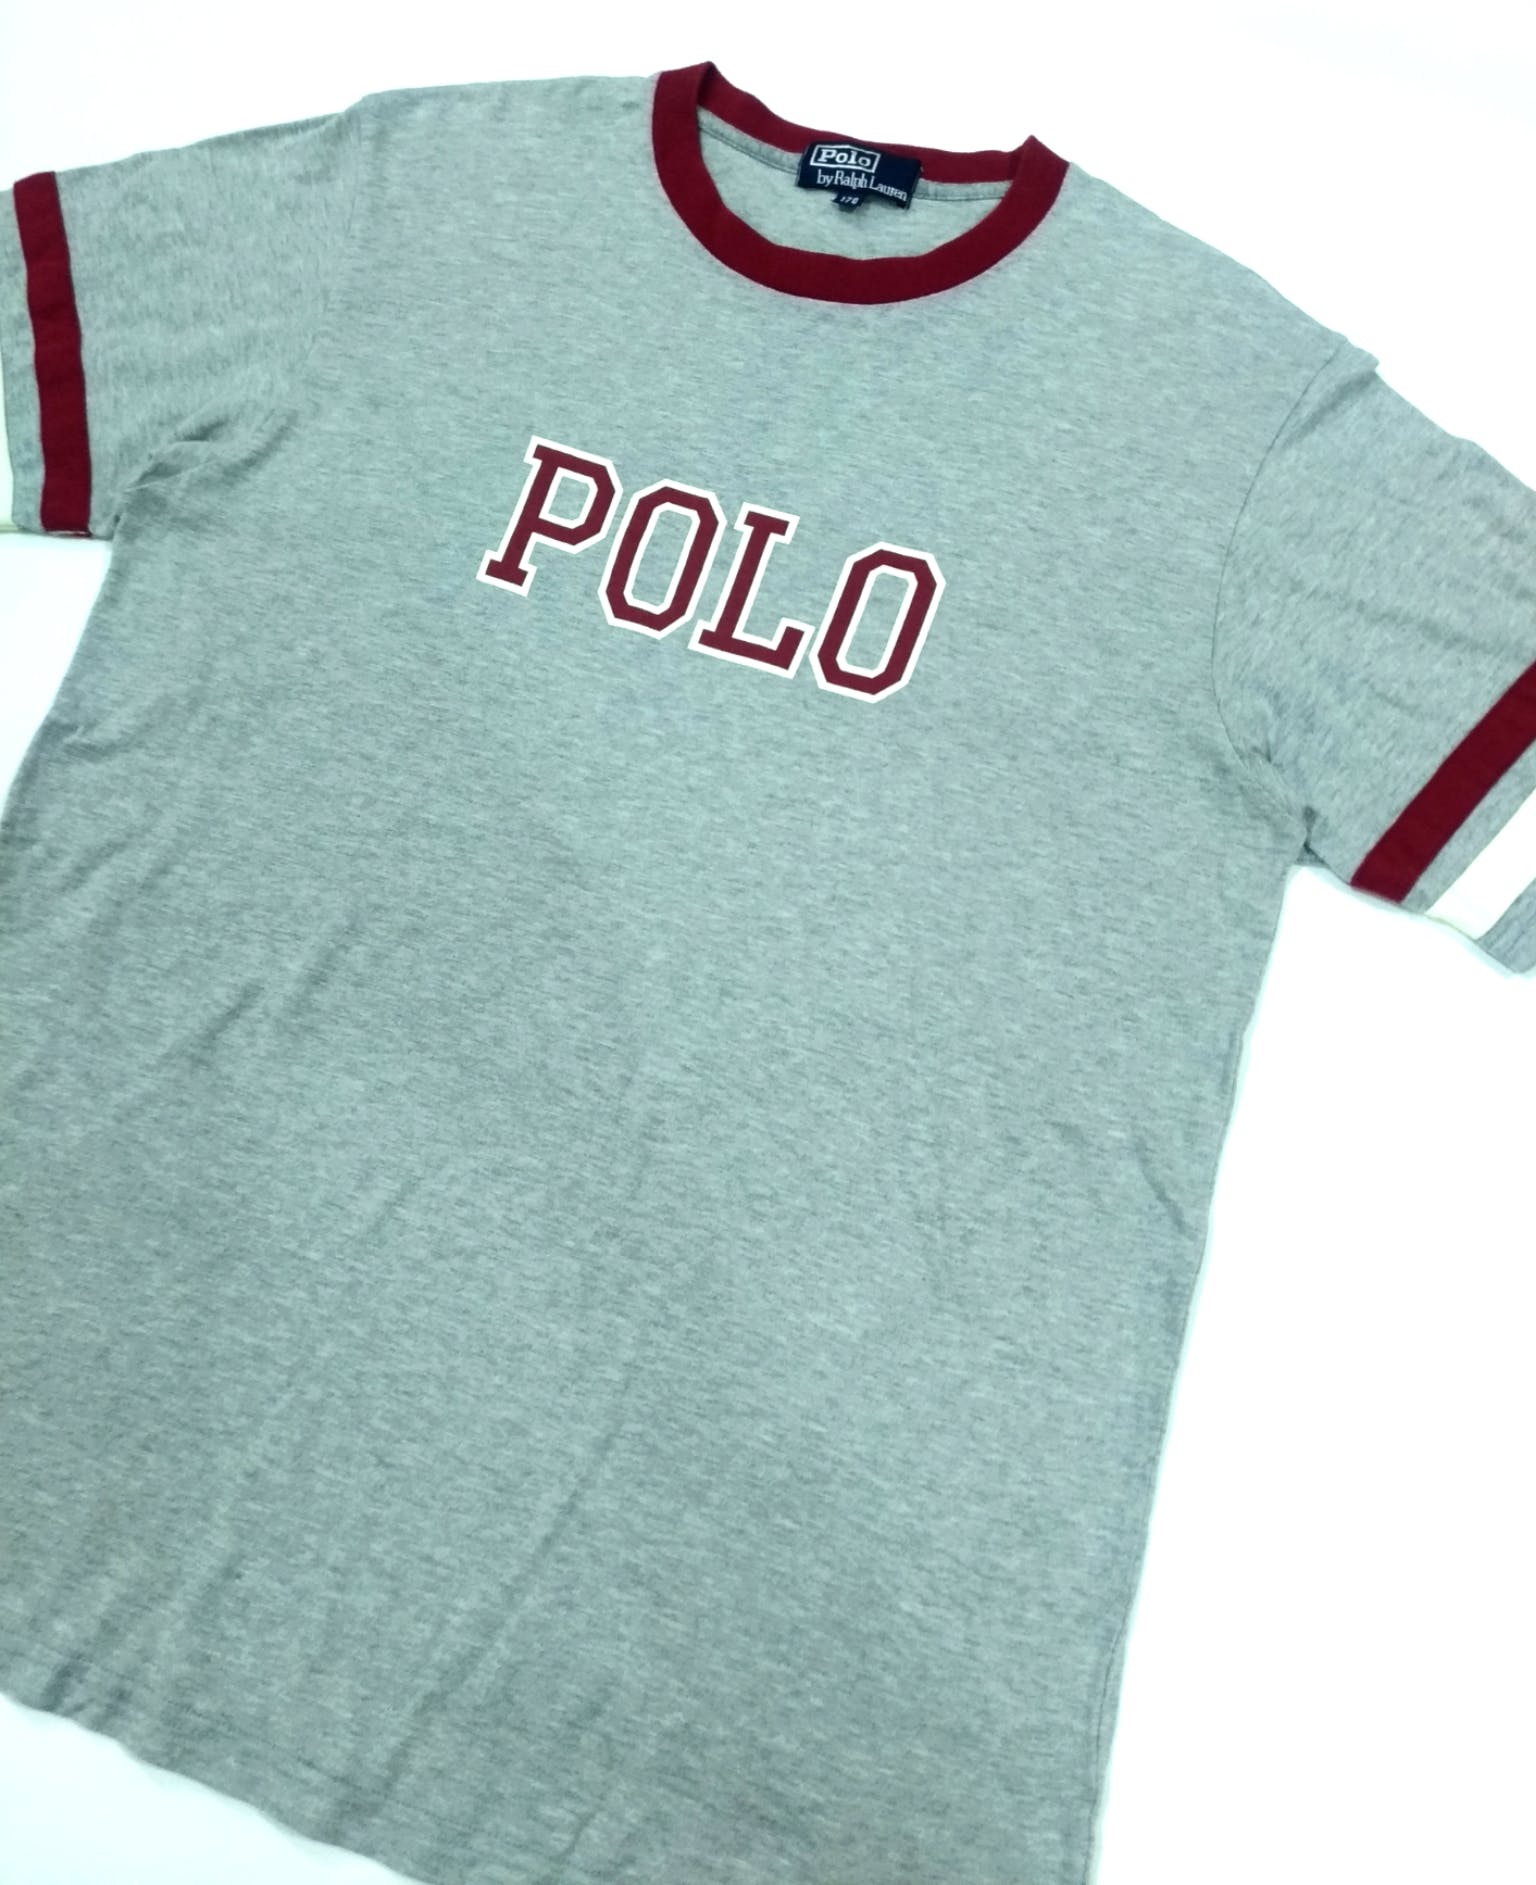 RARE! VTG POLO by RALPH LAUREN BIG SPELL OUT "POLO" - 3